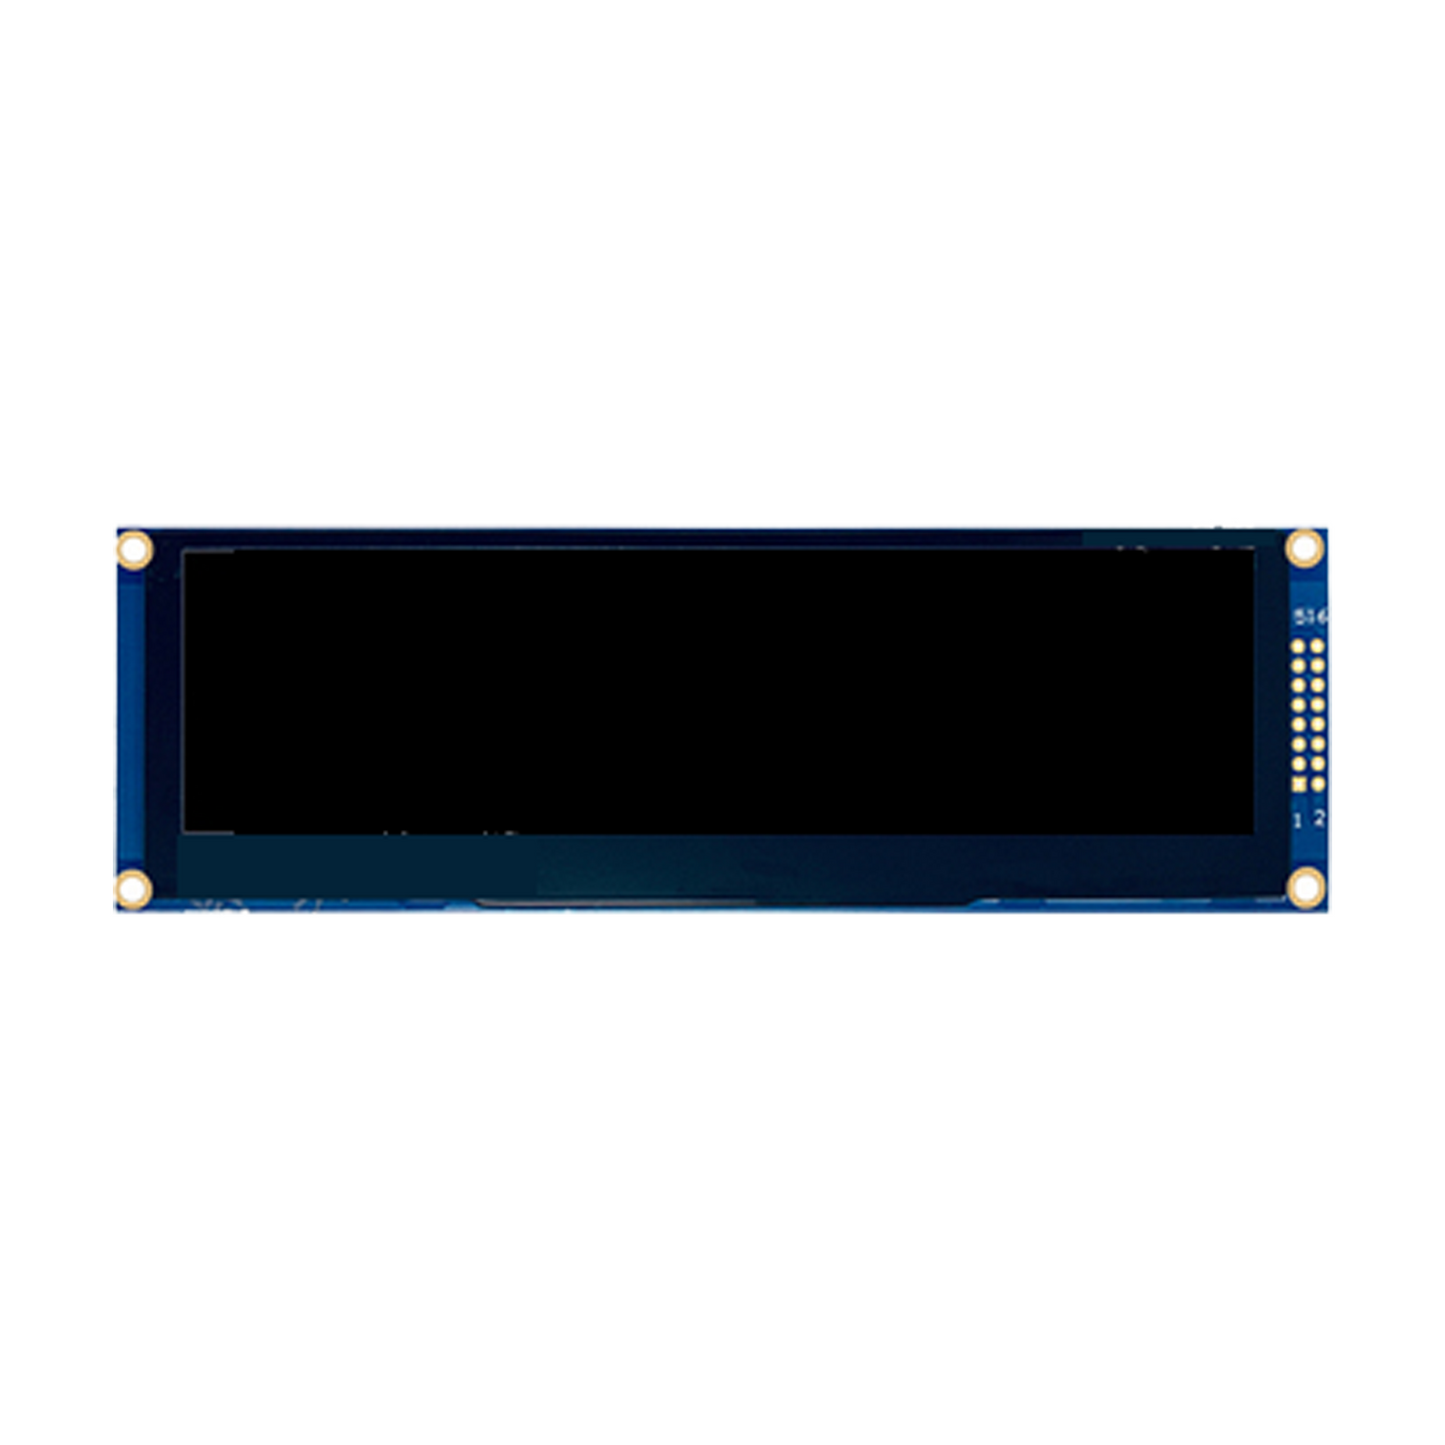 5.5-inch OLED graphic display module with 256x64 resolution, connected via SPI